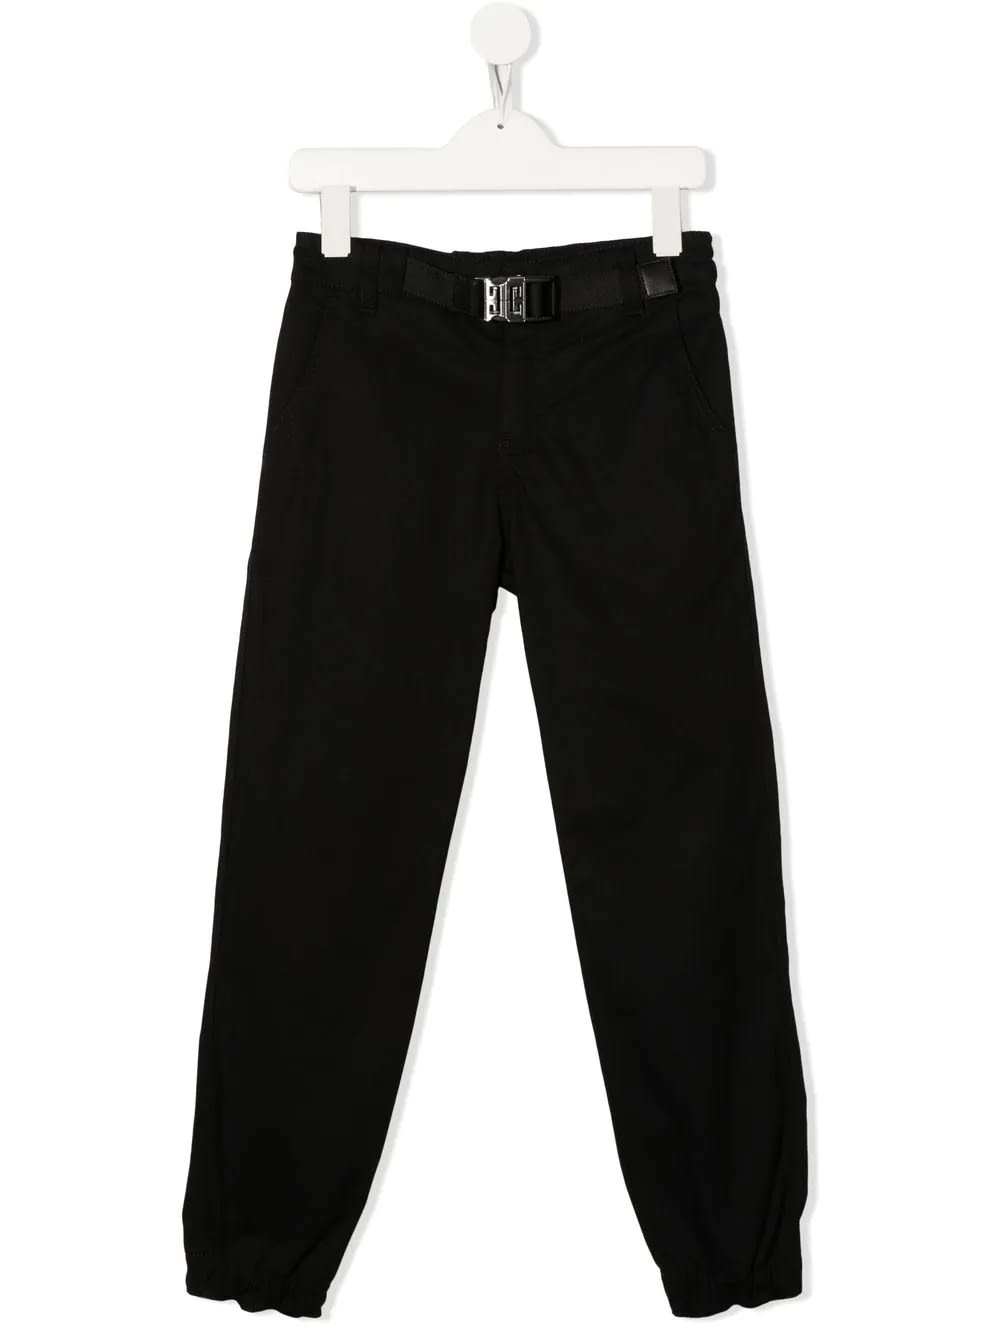 Givenchy Kids Black Trousers With Logoed Belt